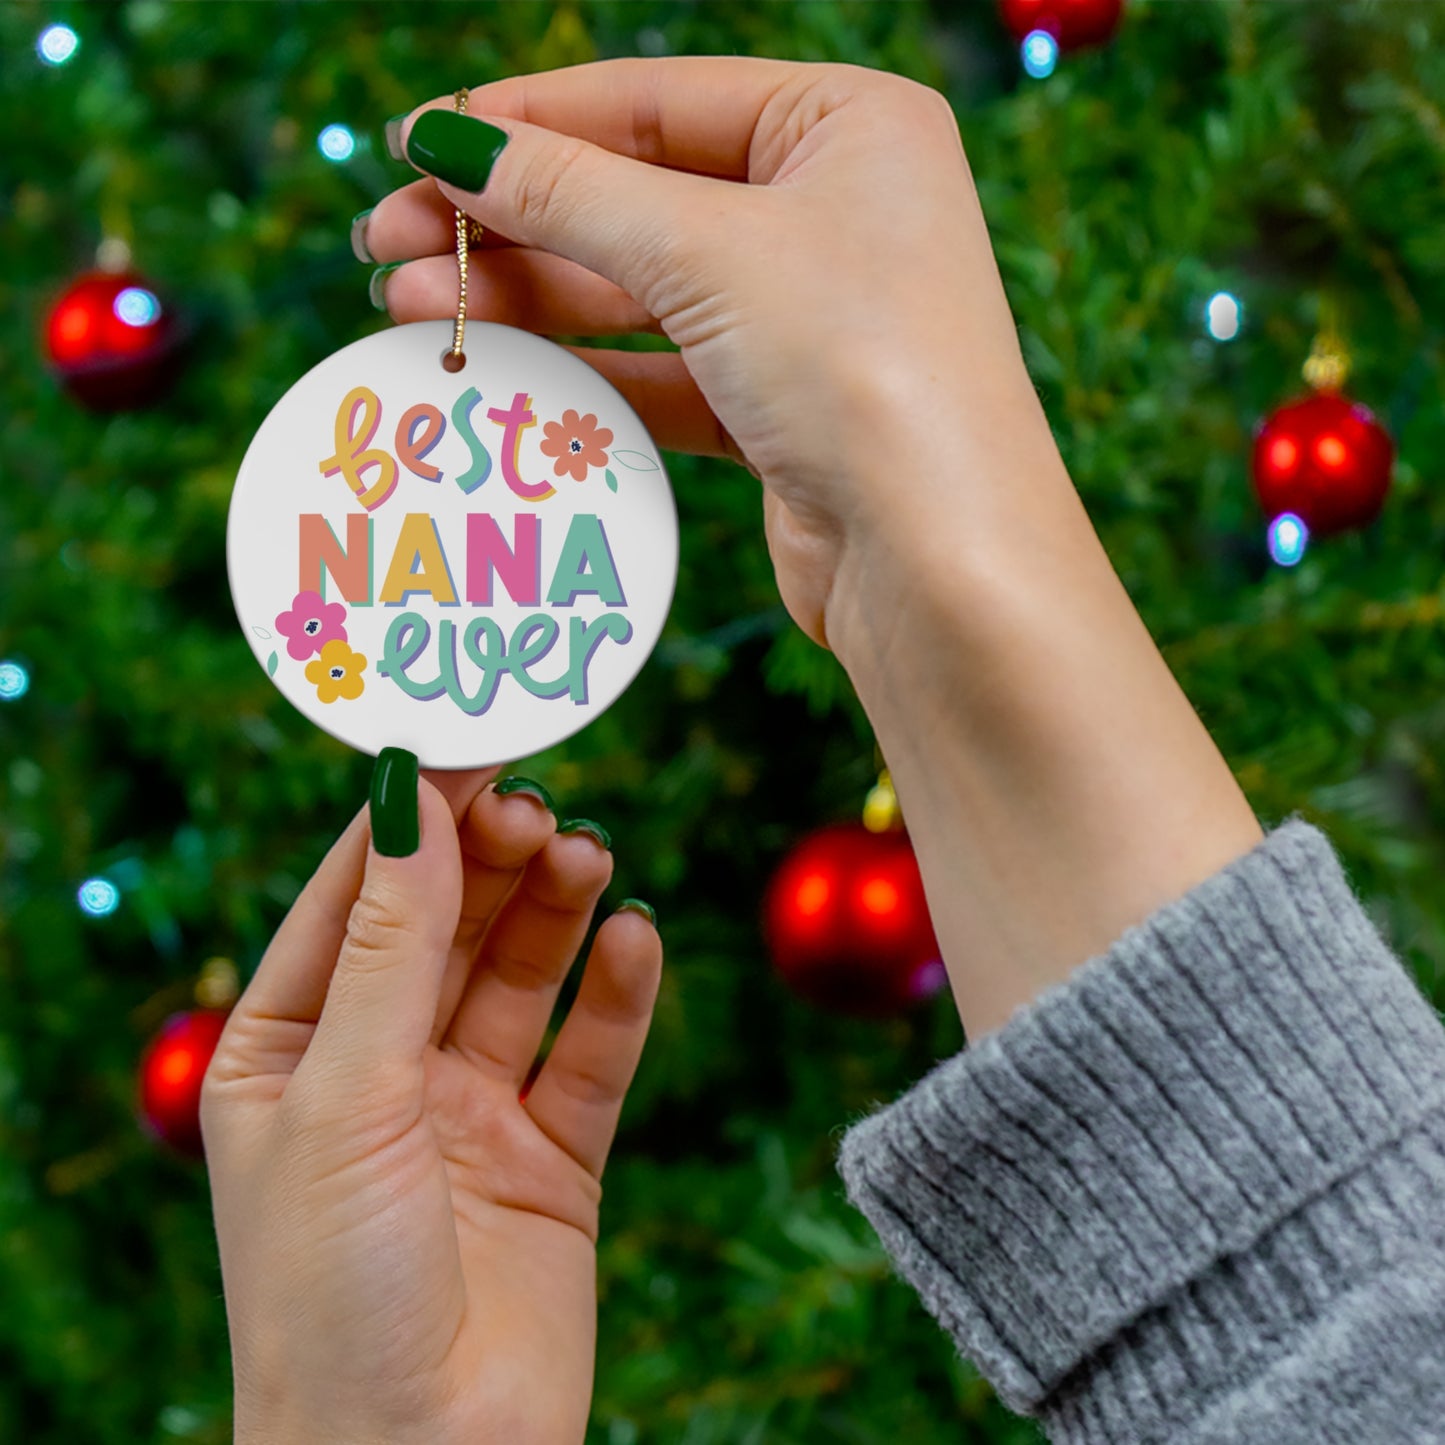 Best Nana Ever Floral Ceramic Ornament, Christmas Gift, Glossy Finish